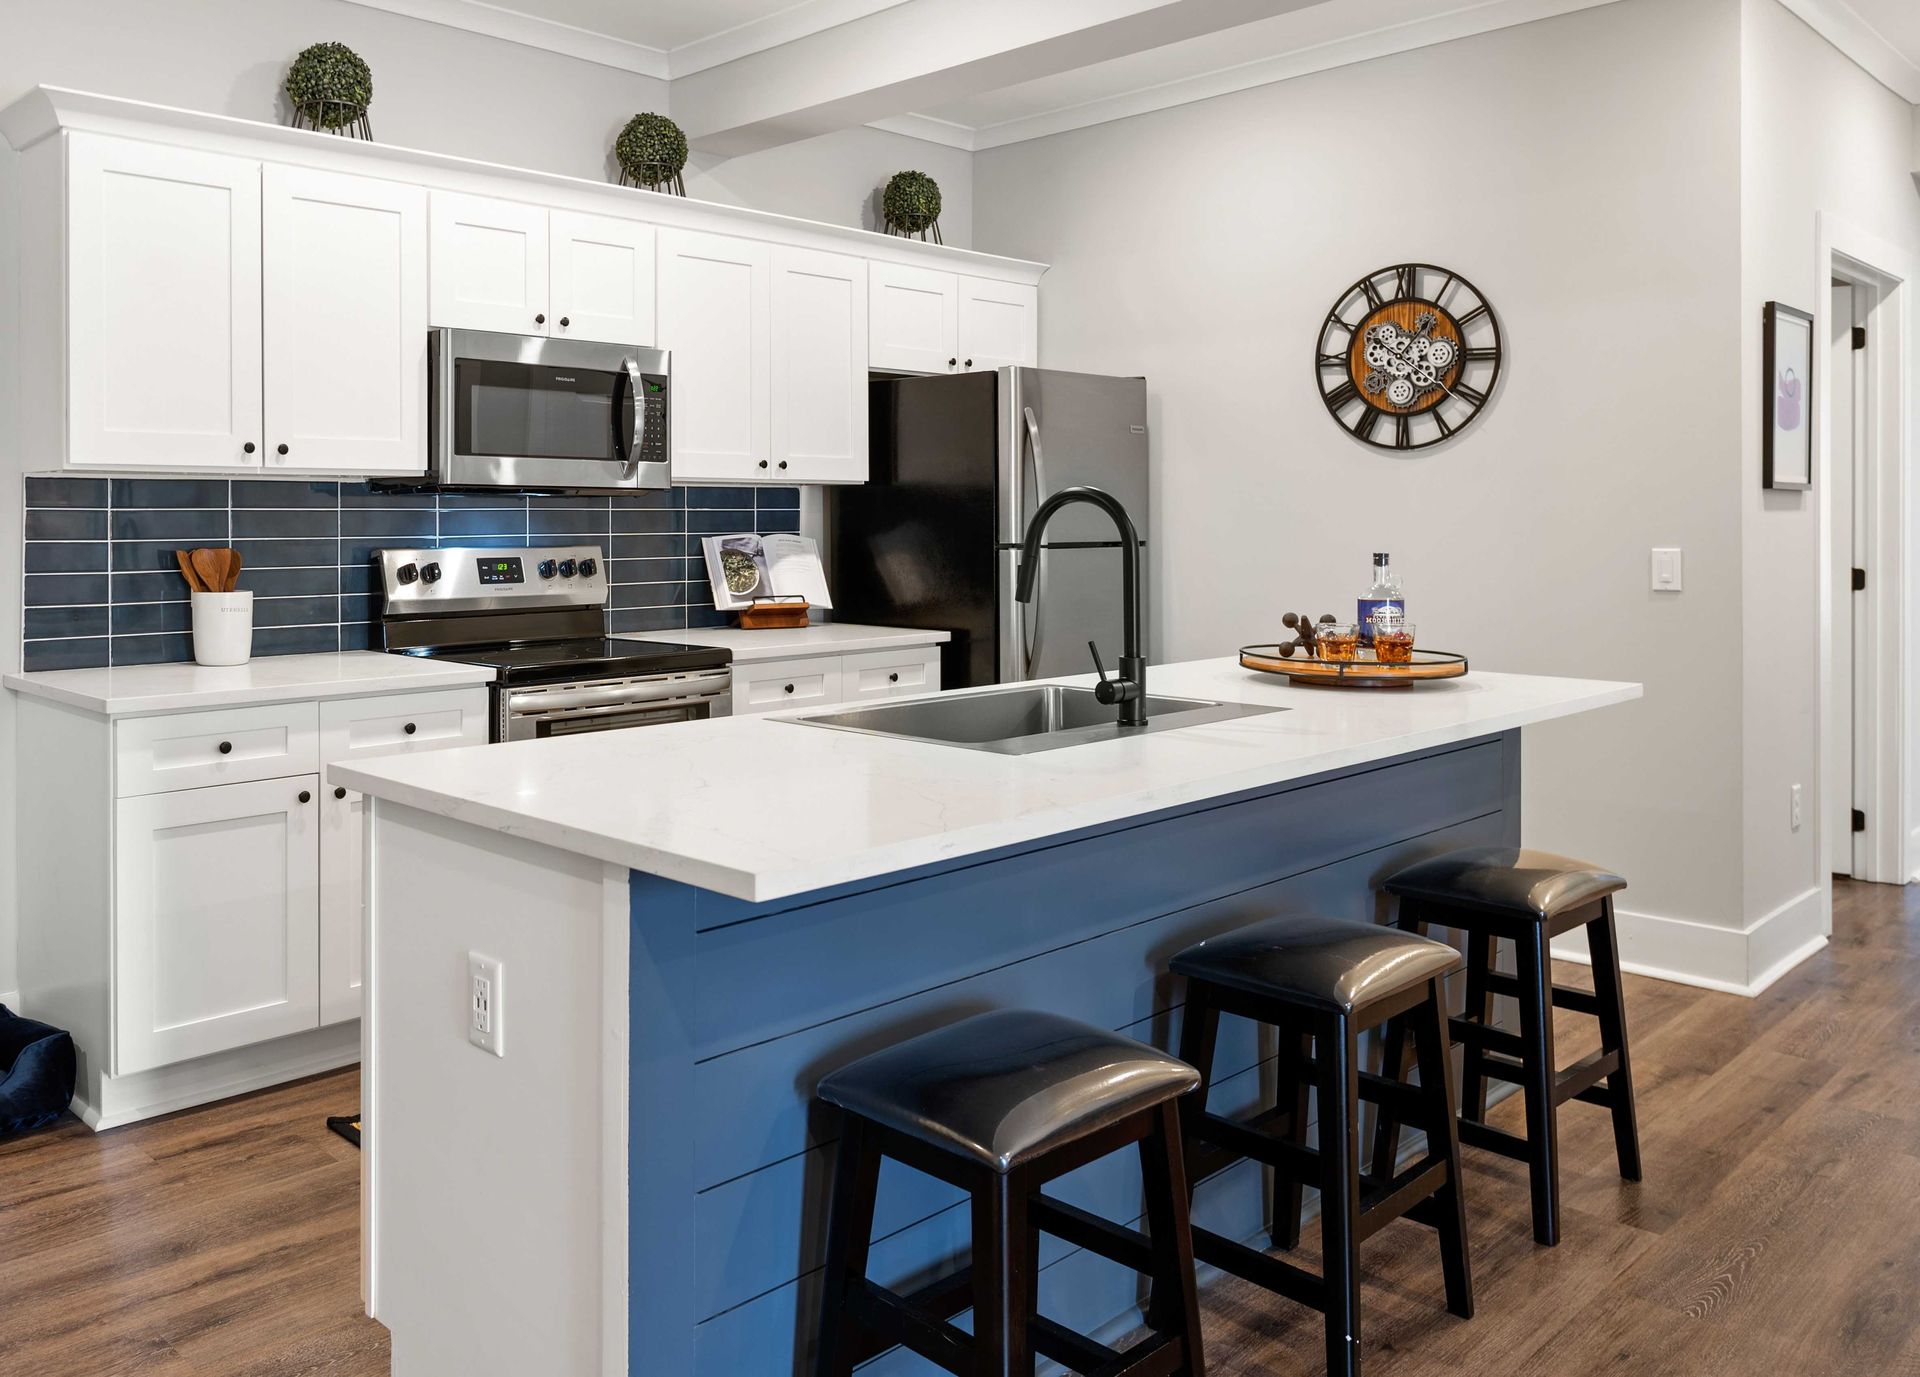 Apartment kitchen with white cabinets, a blue island, stools, a refrigerator and a clock on the wall.